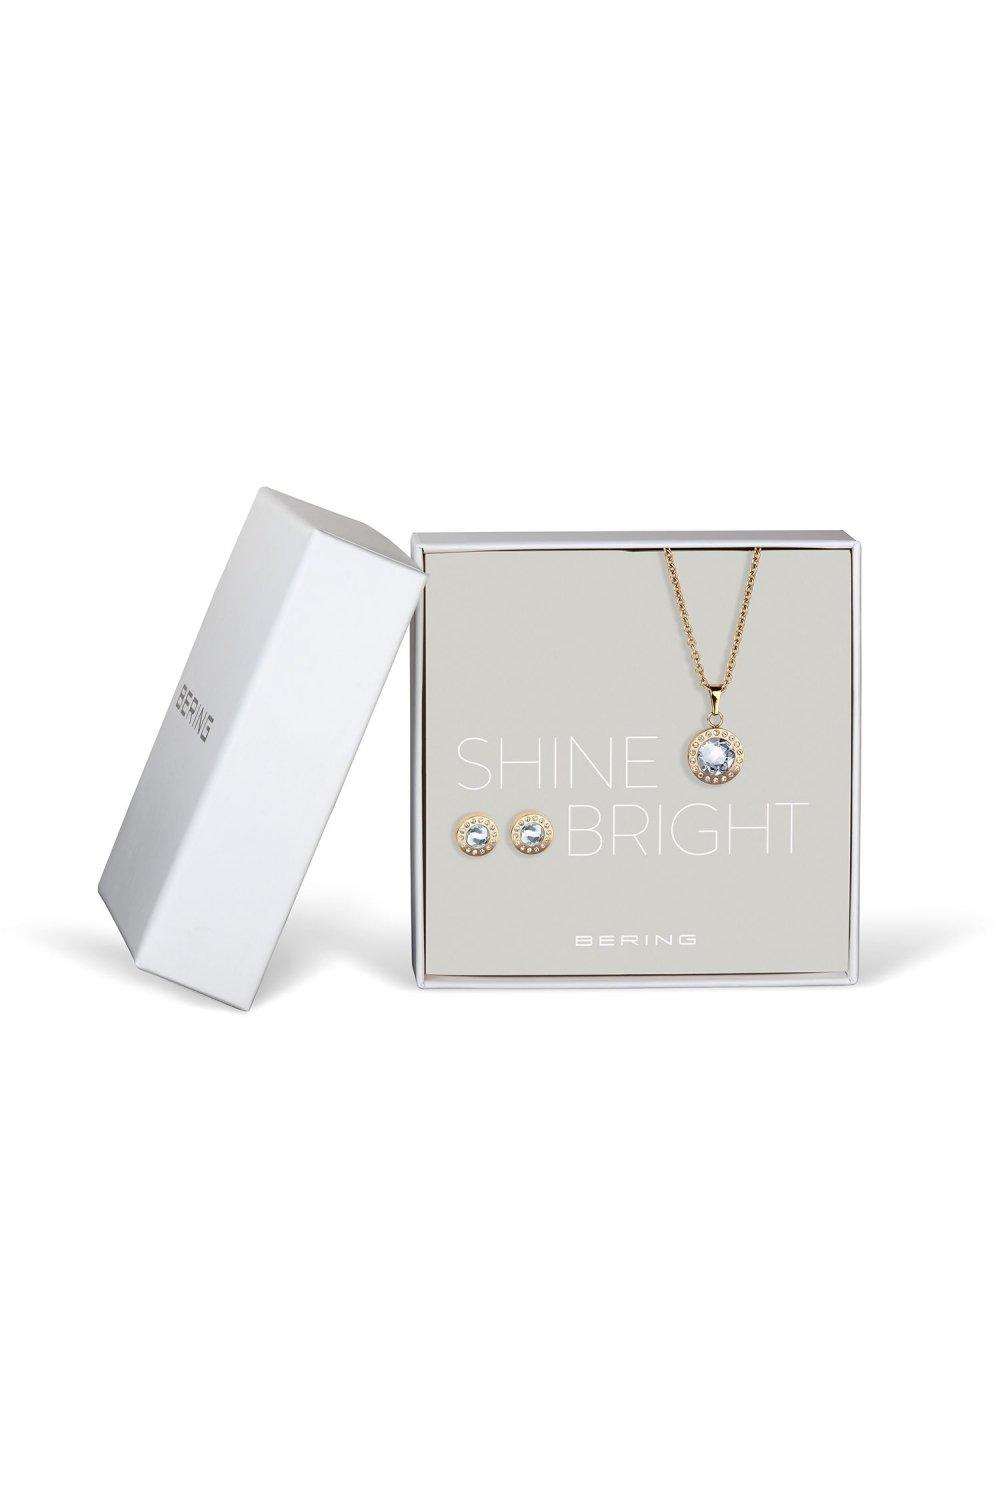 shine bright gift set stainless steel jewellery set - 429-711-gold